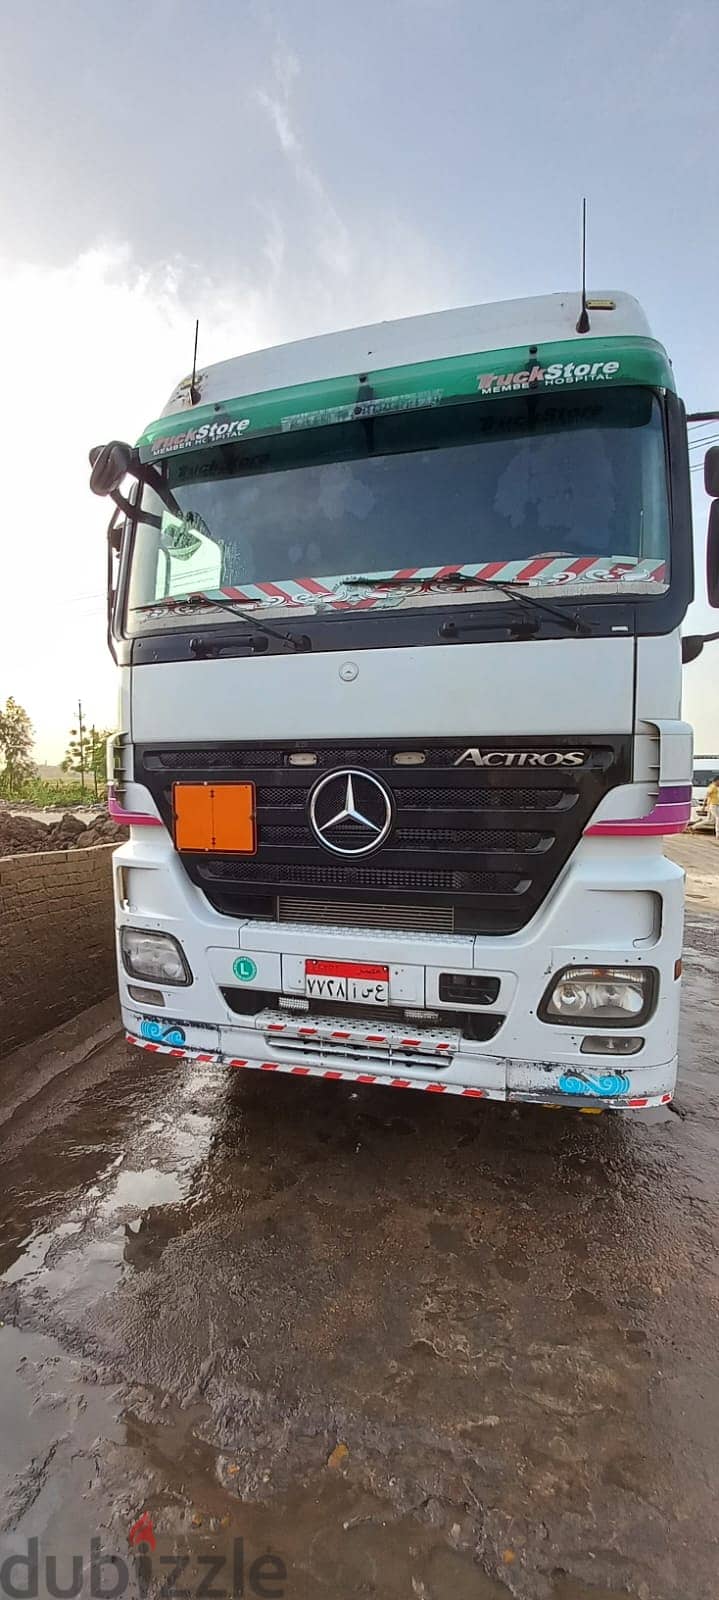 Actros 2005 5